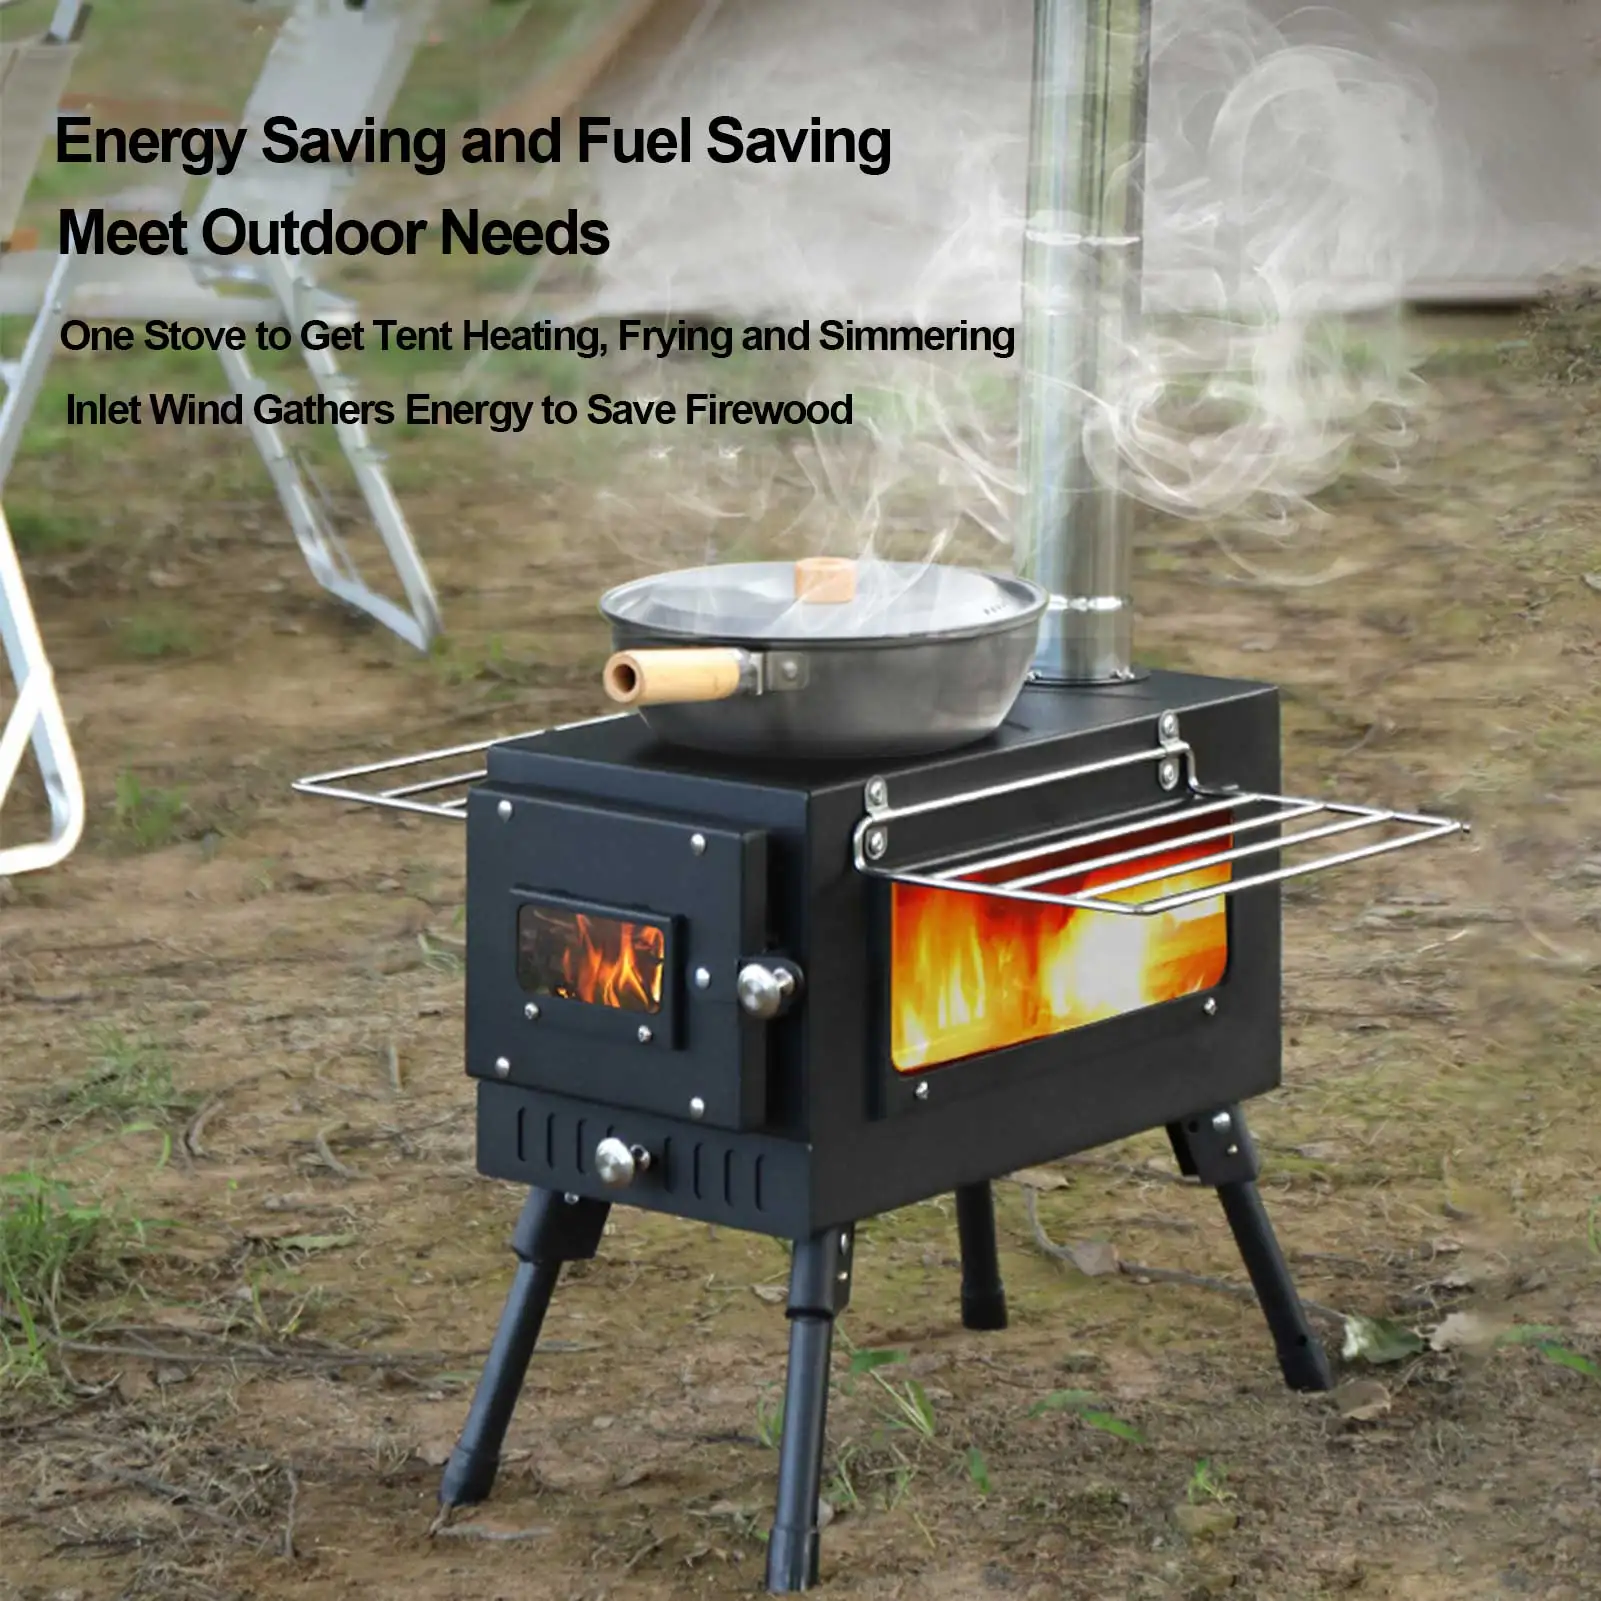 Camping Oven Stove Outdoor Folding Baking Smoked Oven Insulation Stainless  Steel Barbecue Oven Hiking Picnic BBQ Grilling Stove - AliExpress